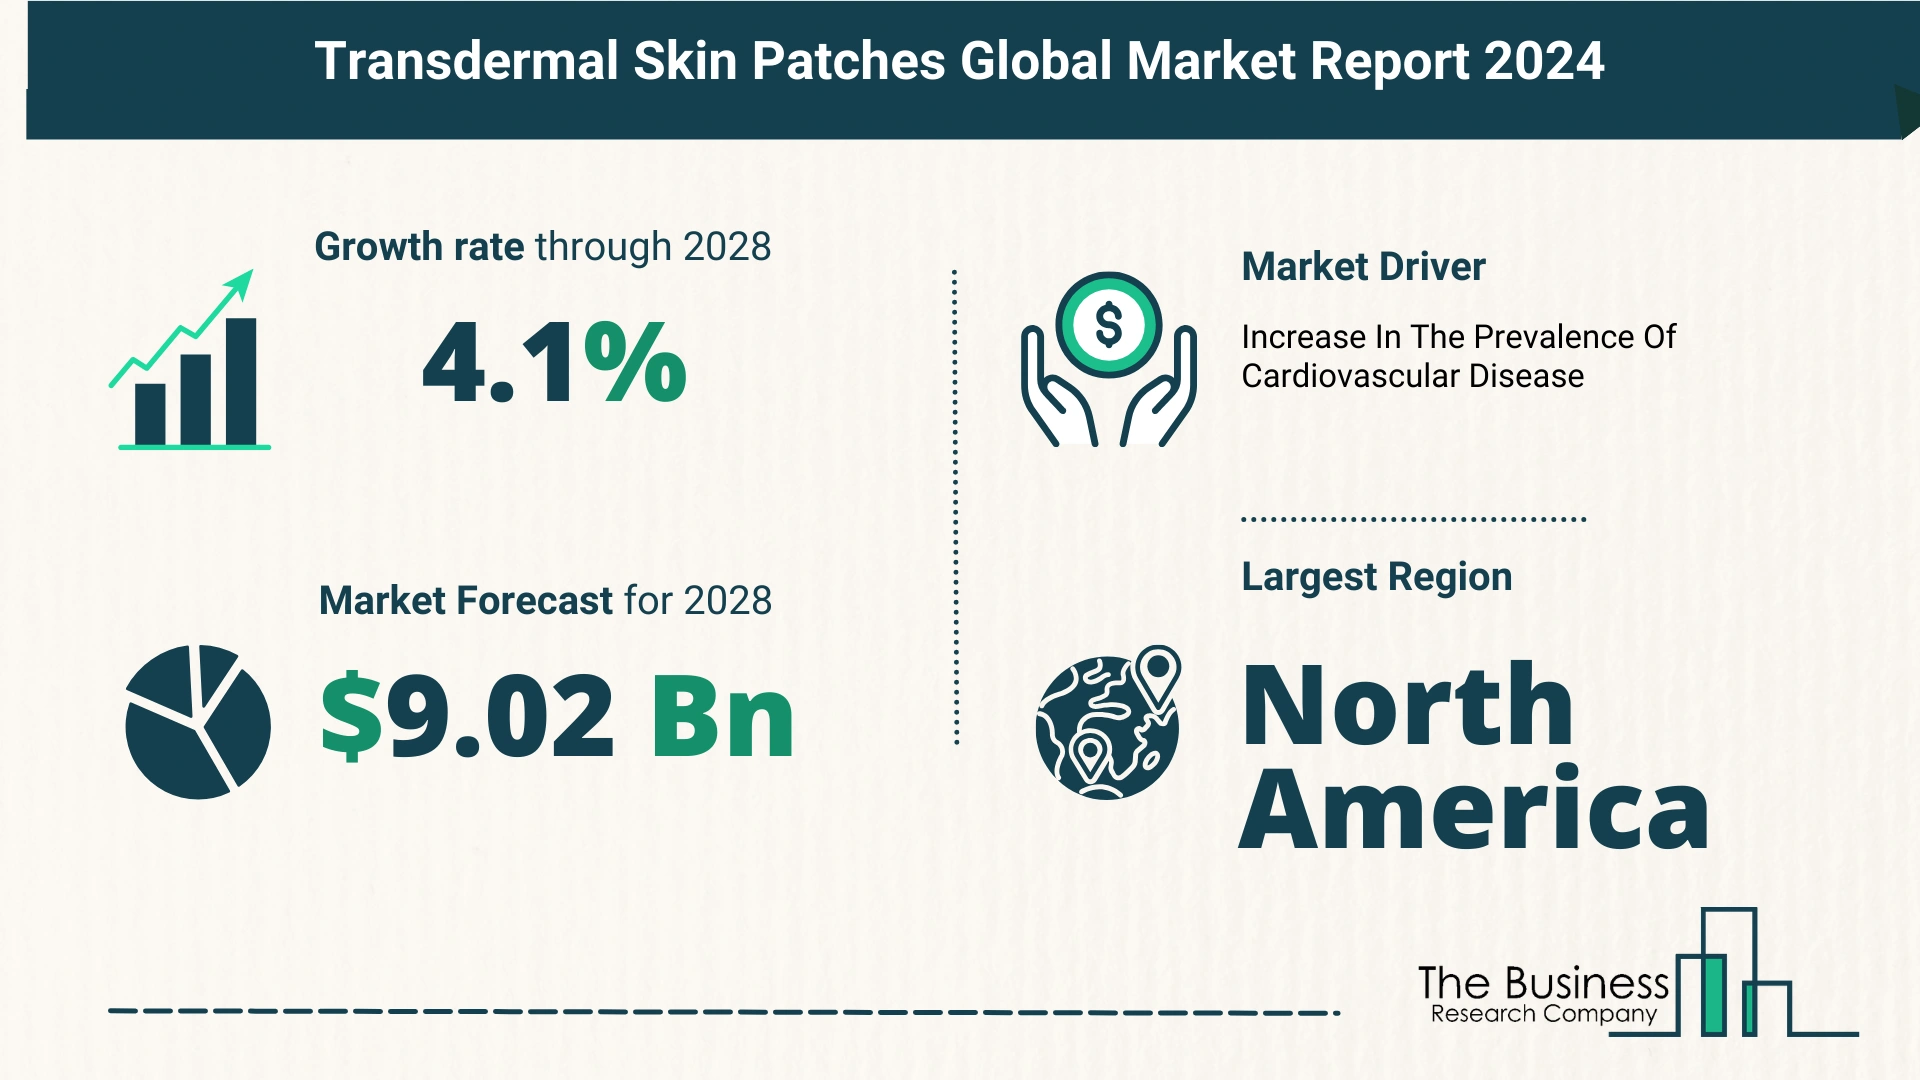 Comprehensive Analysis On Size, Share, And Drivers Of The Transdermal Skin Patches Market